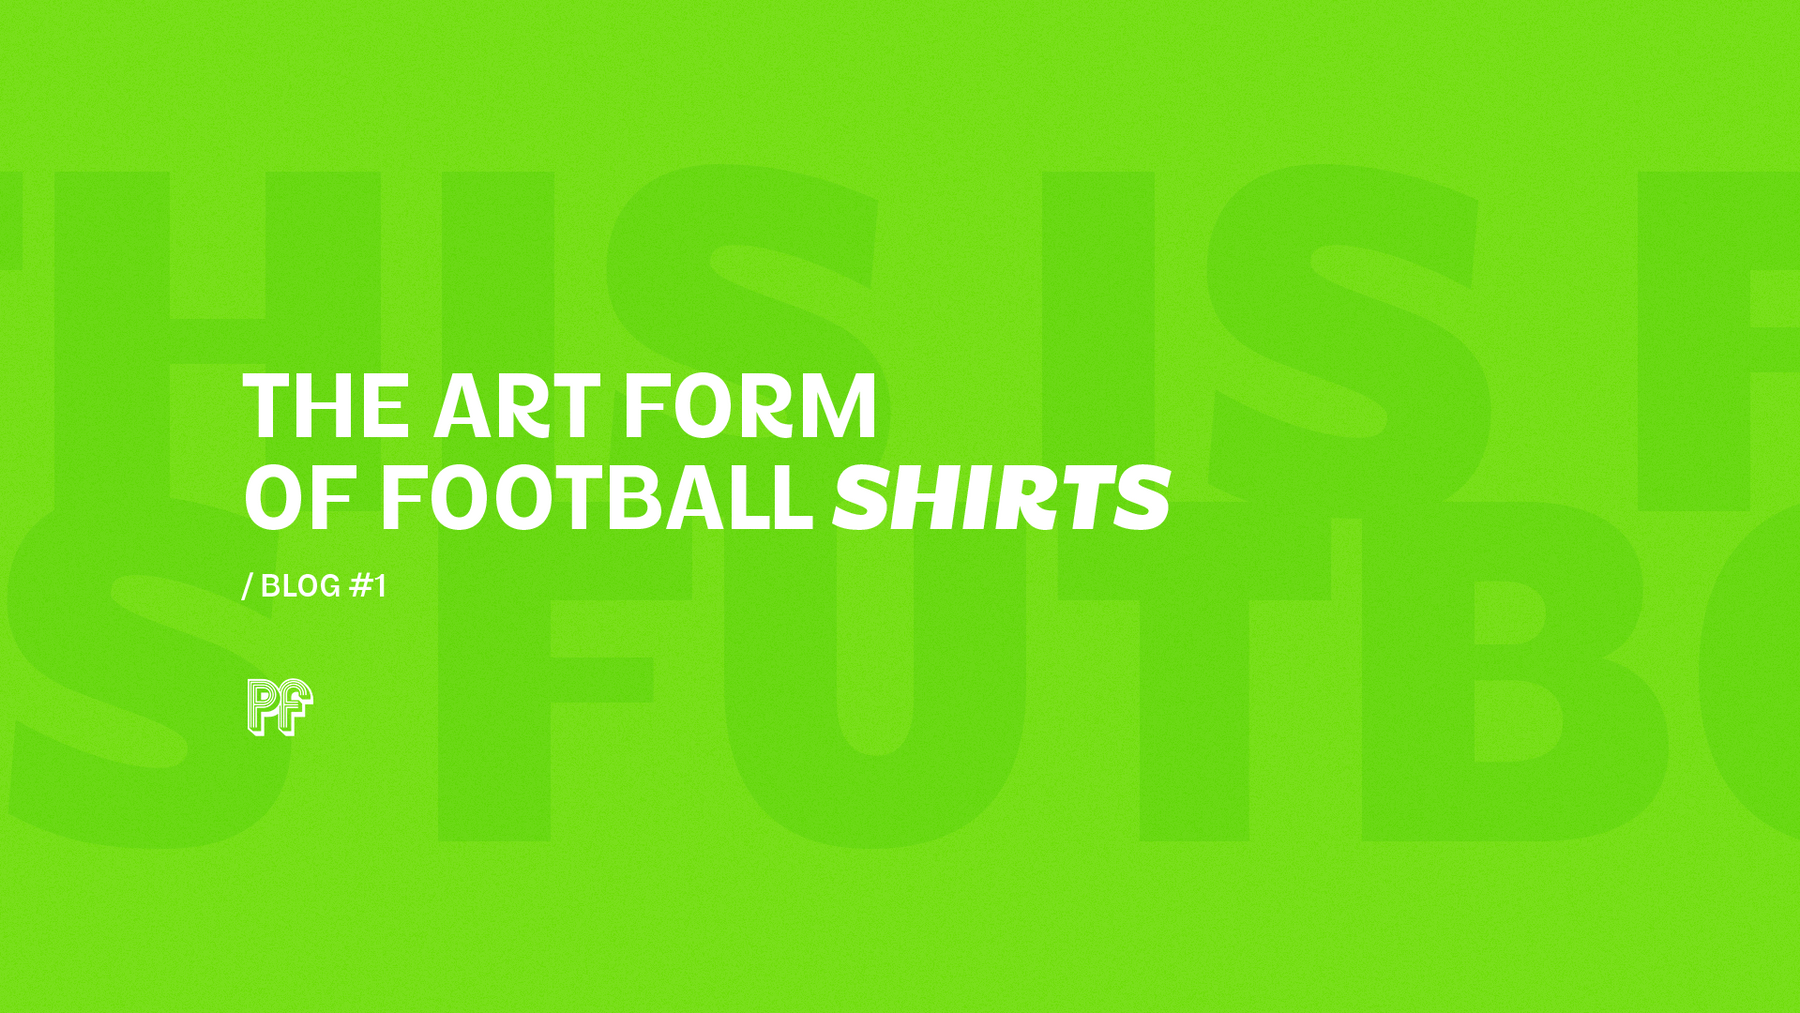 The Art Form of Football Shirts